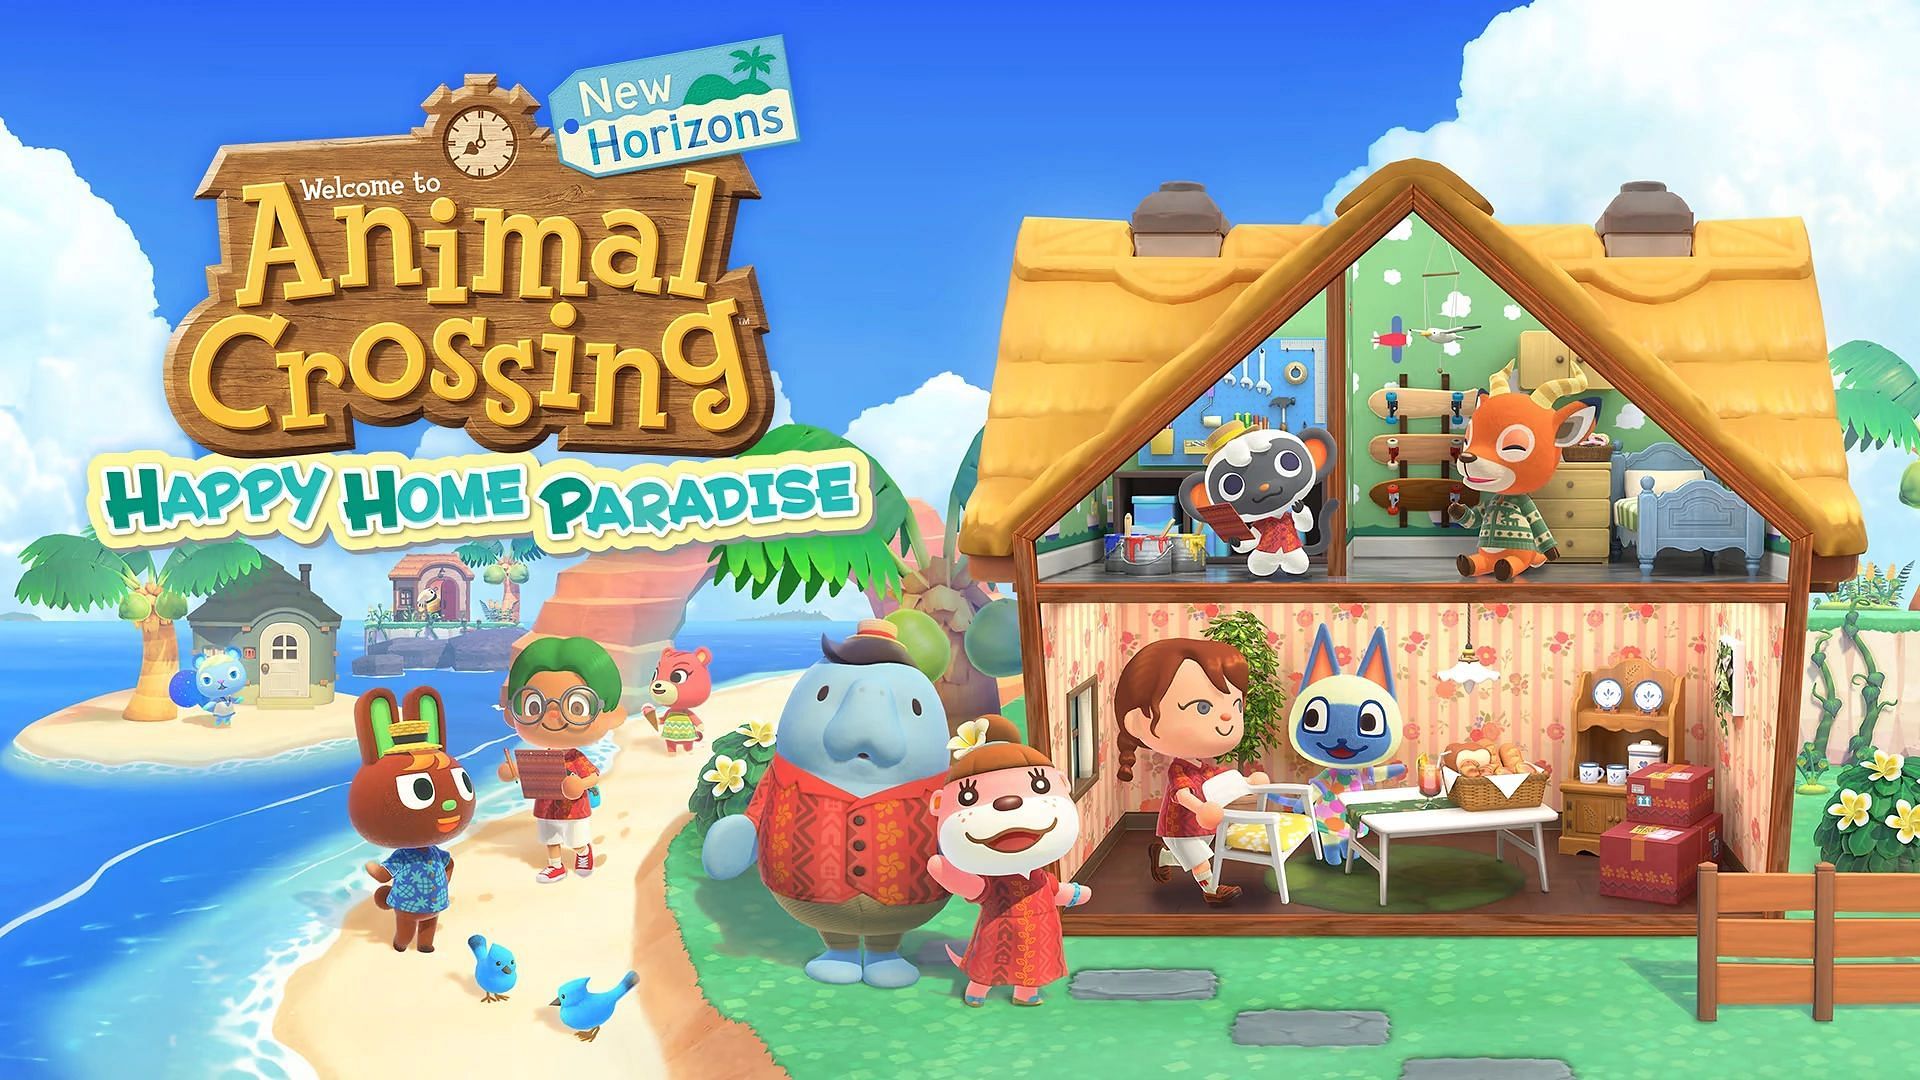 The Happy Home Paradise DLC came to Animal Crossing: New Horizons in 2021 (Image via Animal Crossing Fandom)